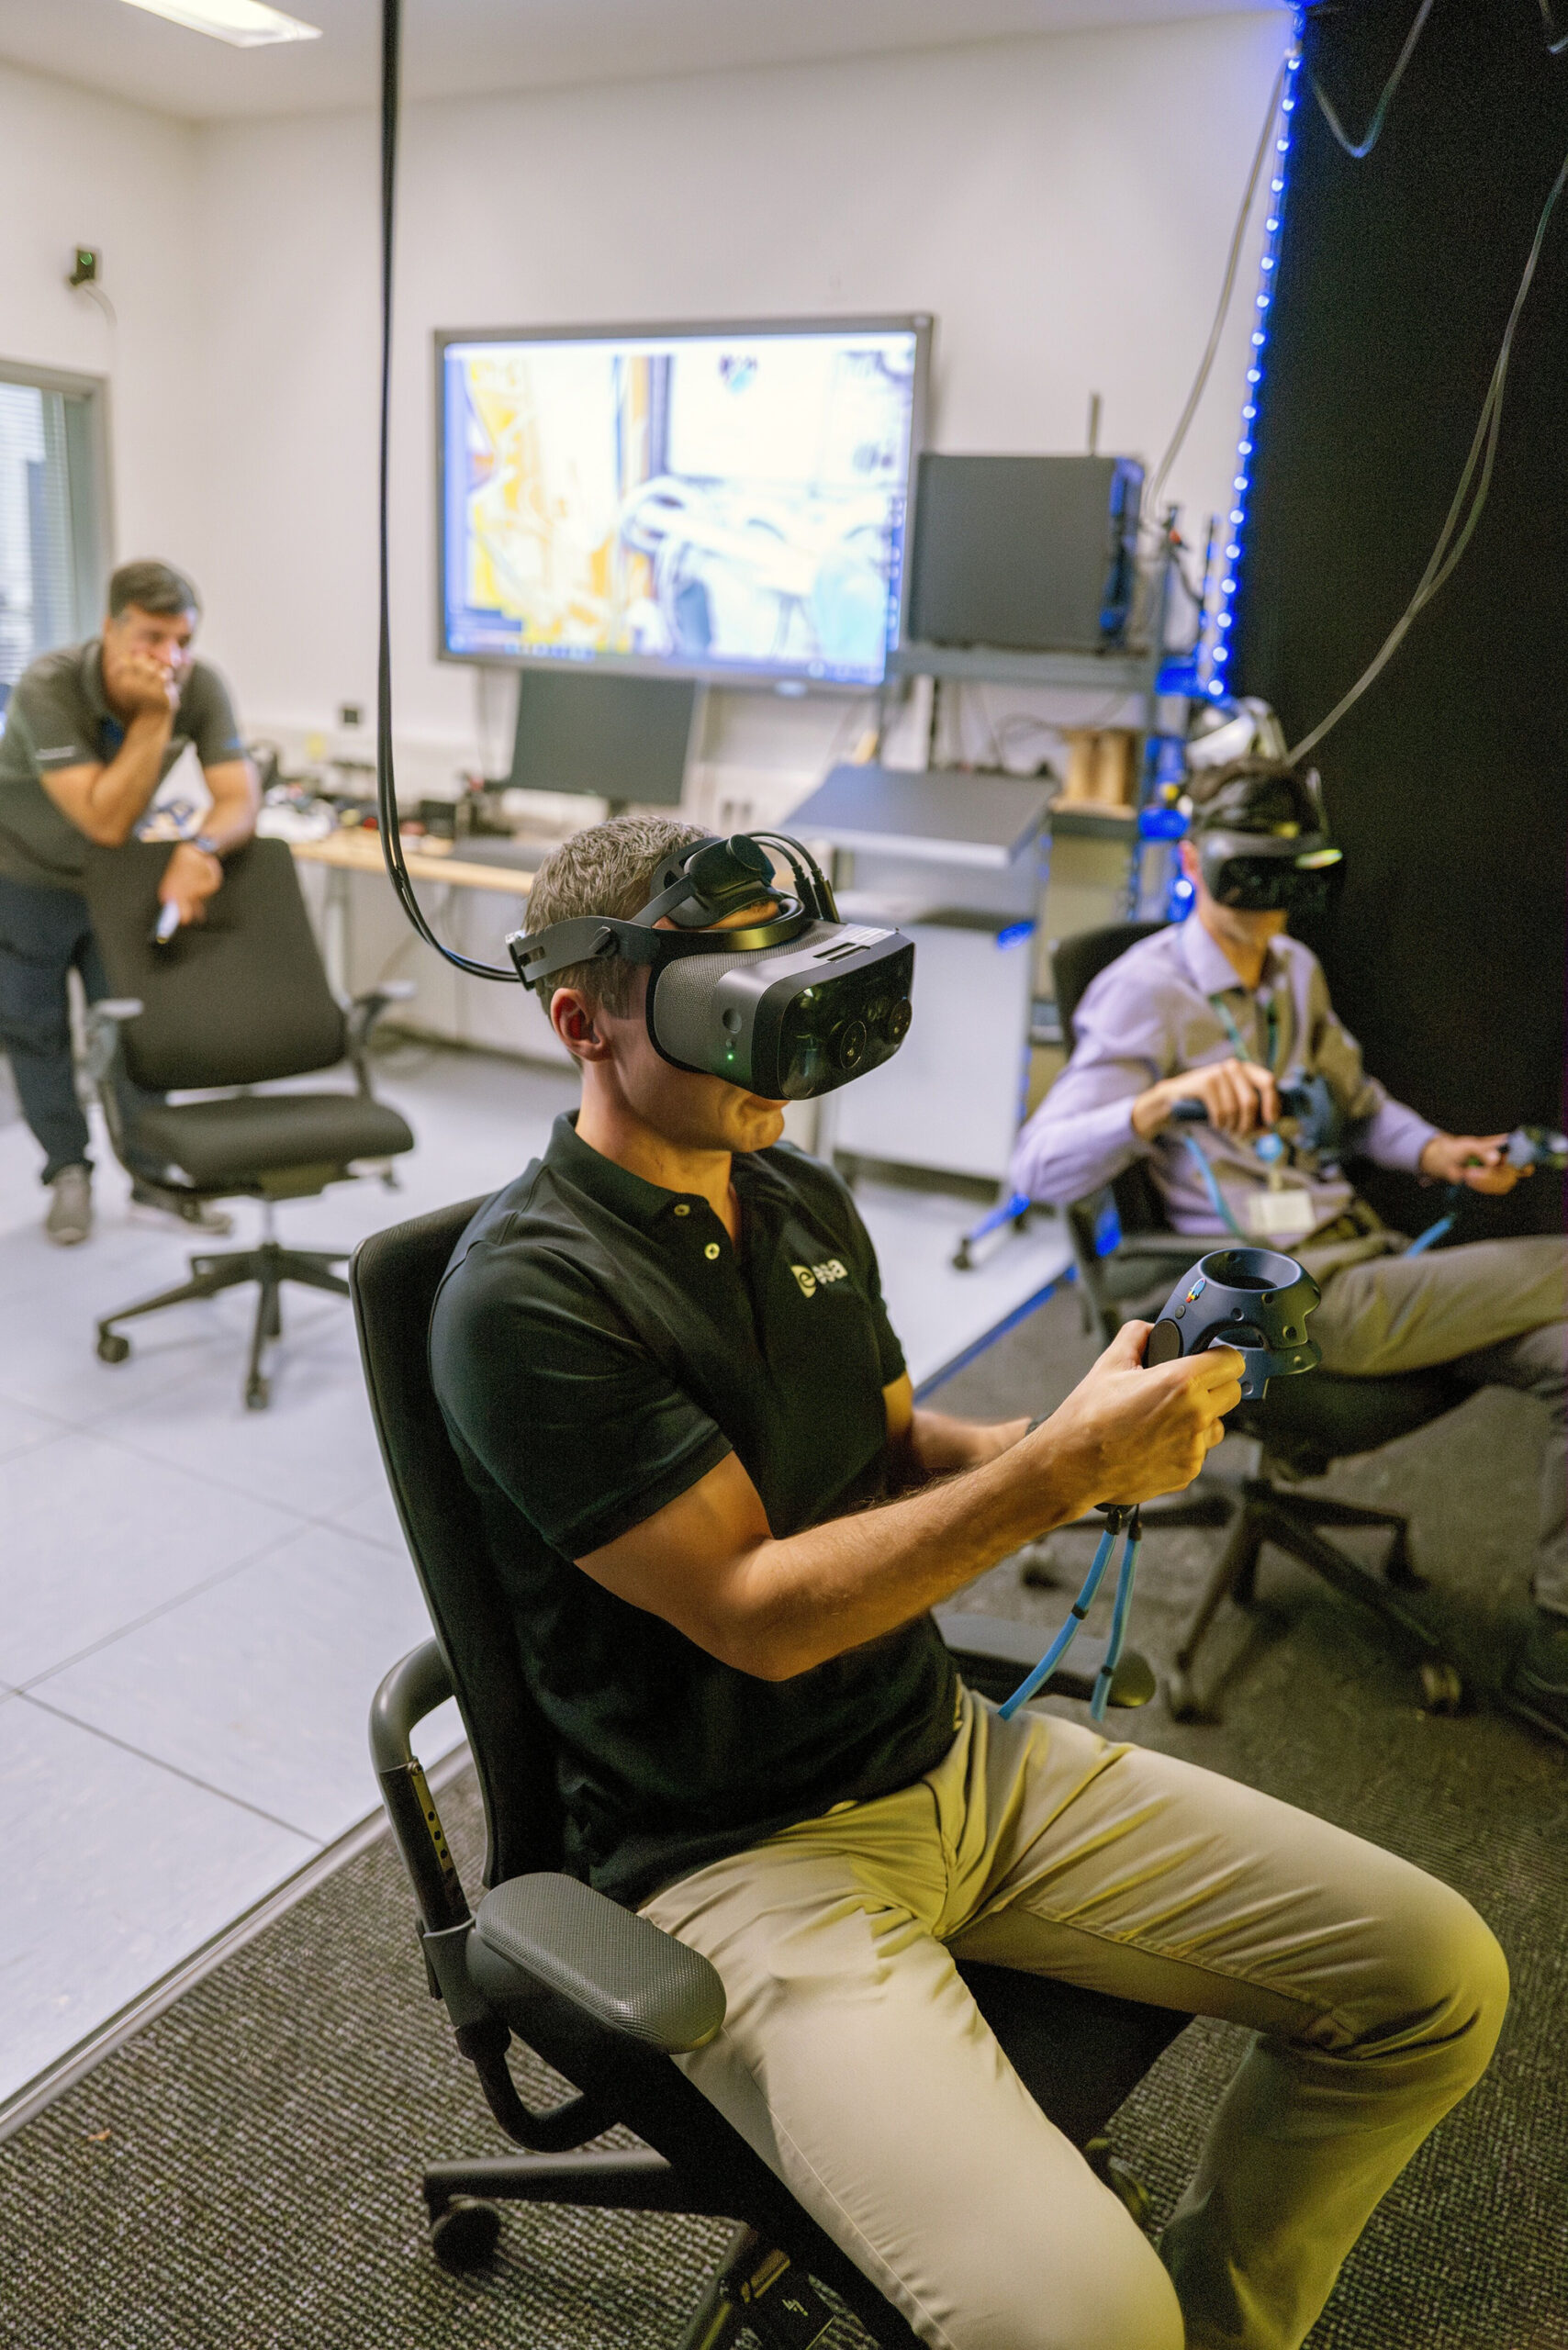 Marcus Wandt training with VR at the European Astronaut Centre